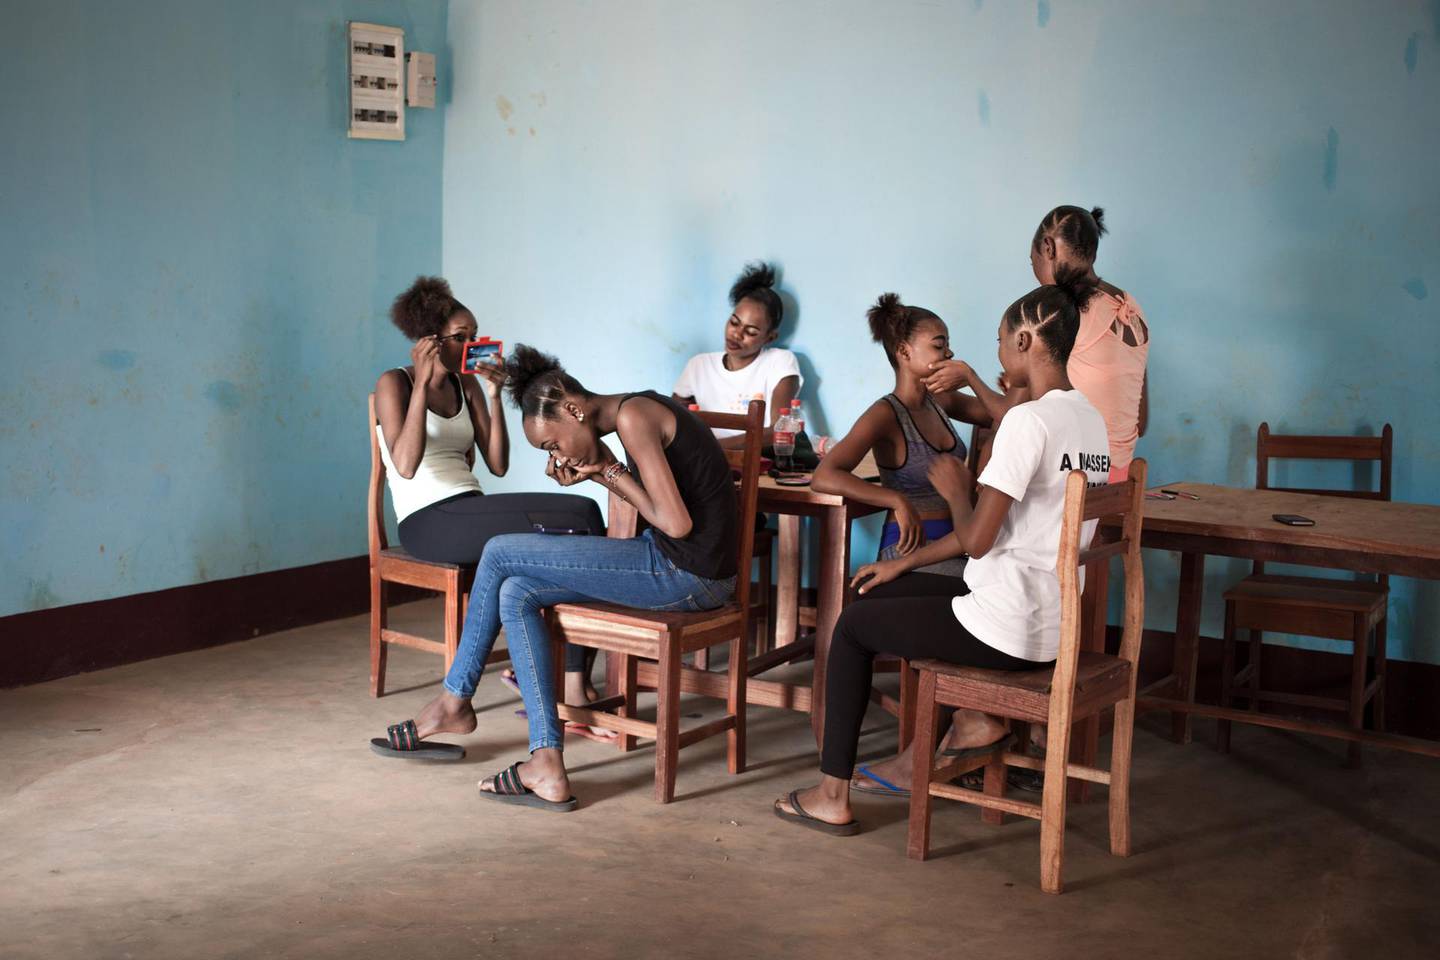 A Miss Central African Republic 2018 contestants puts on make-up at the boarding school where the contestants reside before the contest, in Bimbo, on December 9, 2018. The Miss Central African Republic beauty pageant has disappeared from the country since 2015, and resurrected thanks to Russia, already present through military donations. / AFP / FLORENT VERGNES
